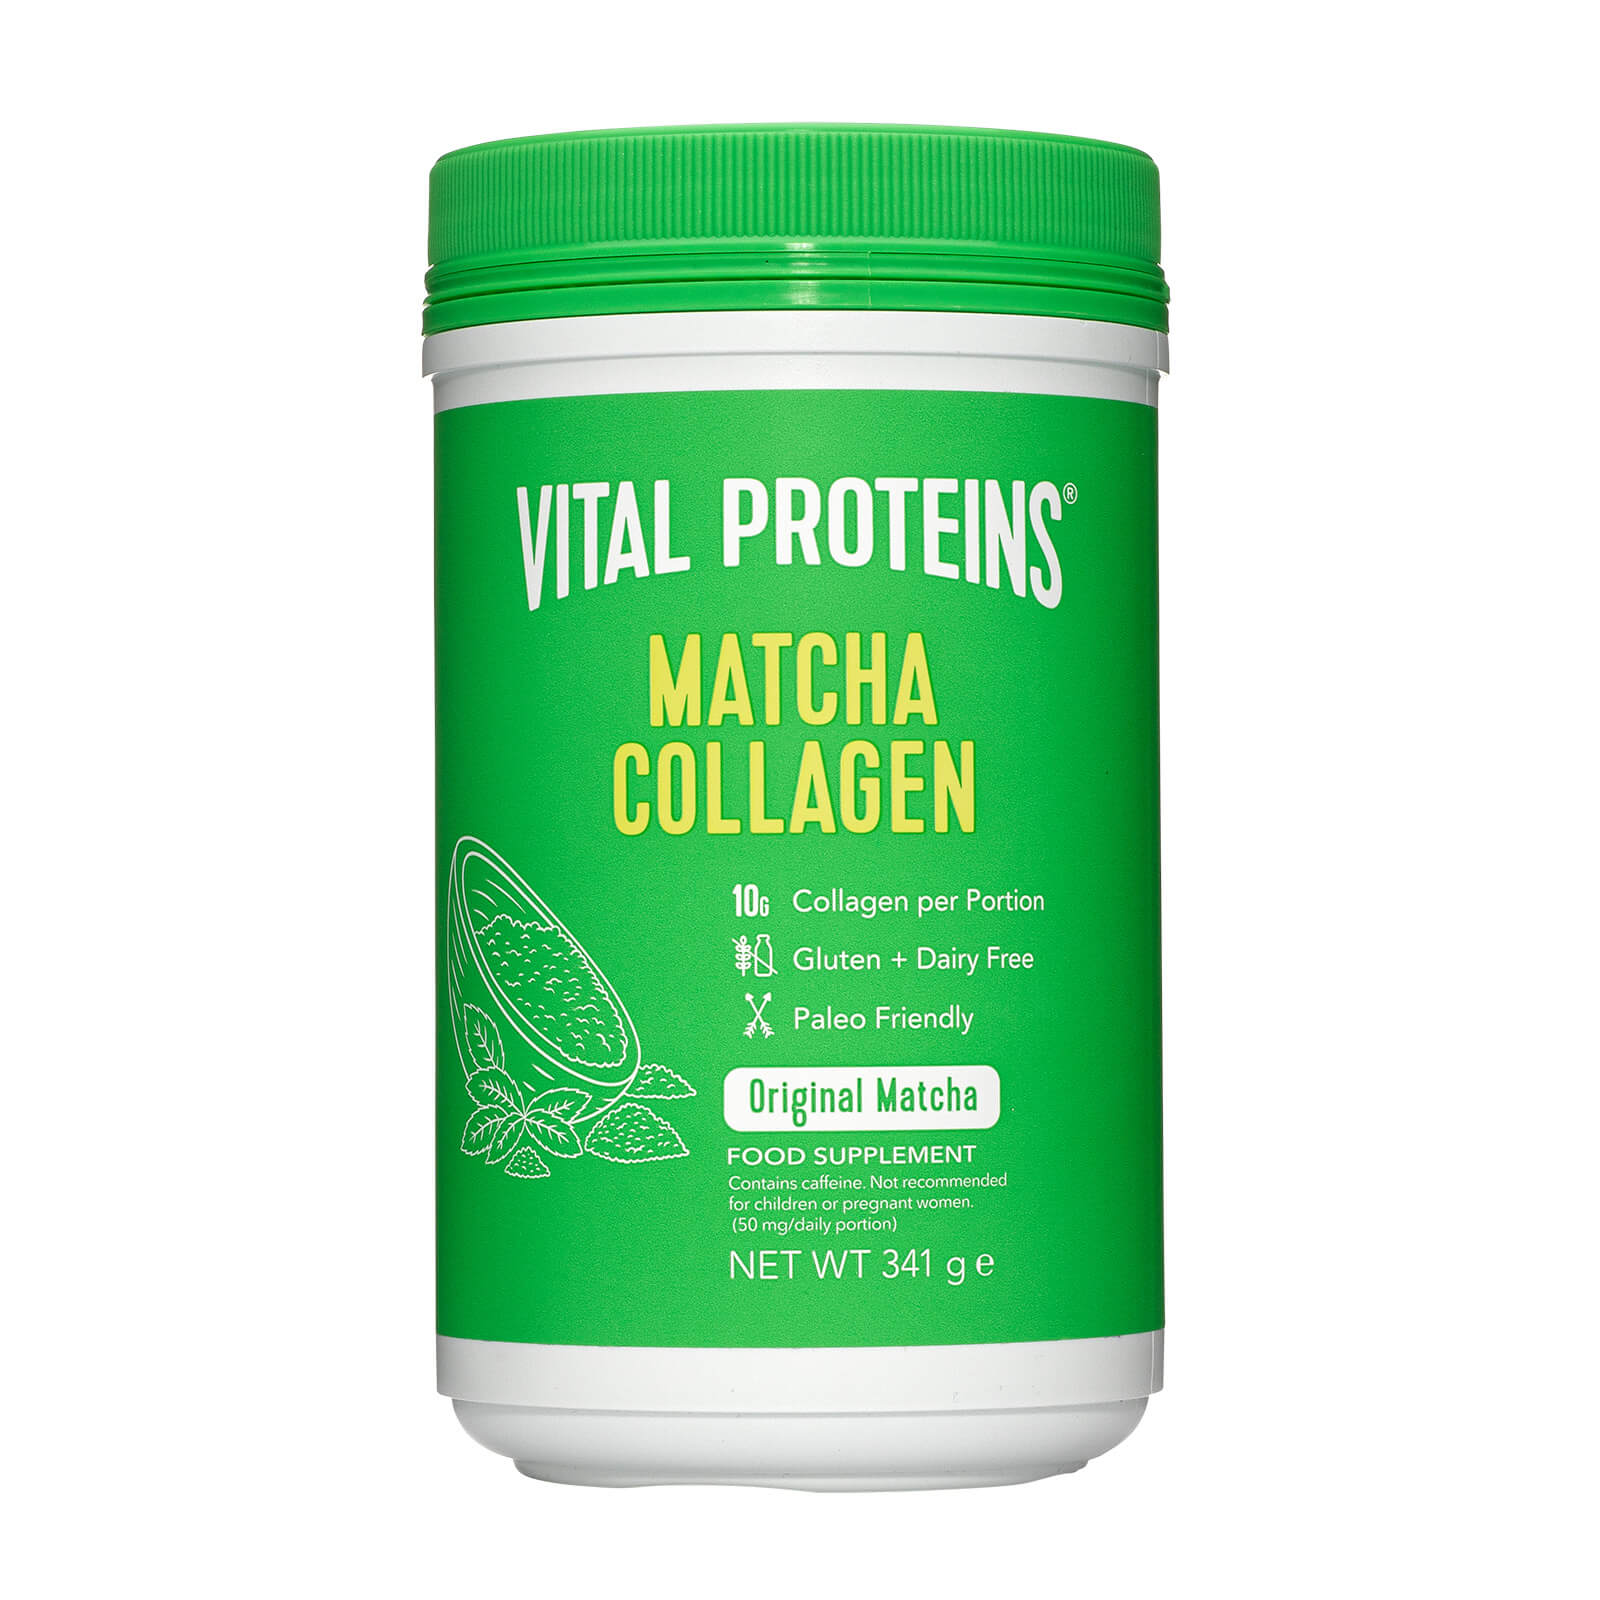 Matcha Collagen - 12oz Subscription - Delivery Every 4 Months